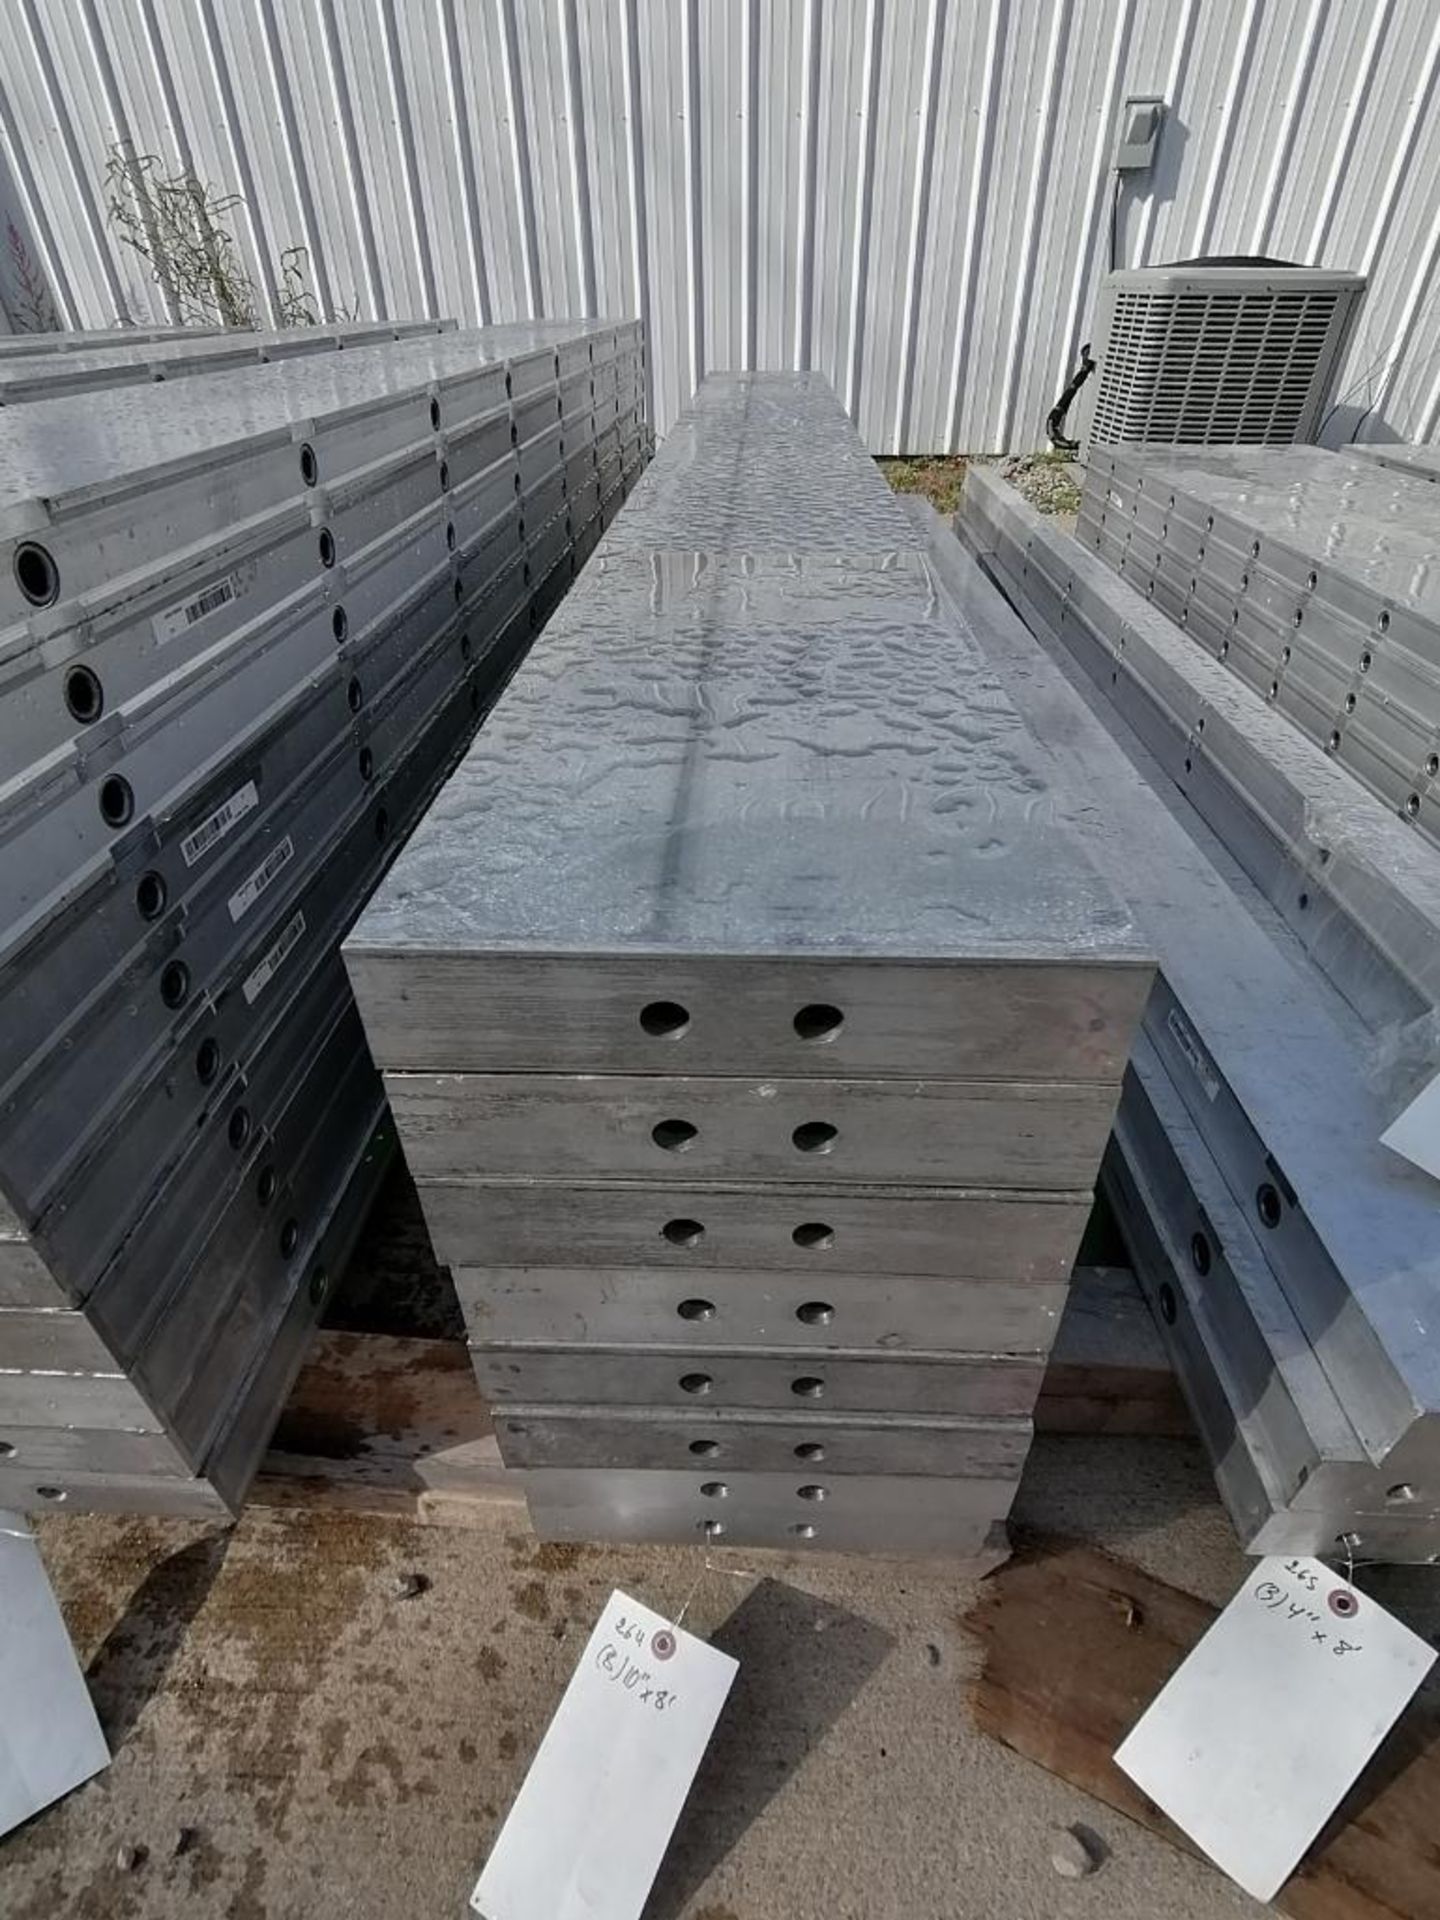 (8) 10" x 8' NEW Badger Smooth Aluminum Concrete Forms 6-12 Hole Pattern. Located in Mt. Pleasant,